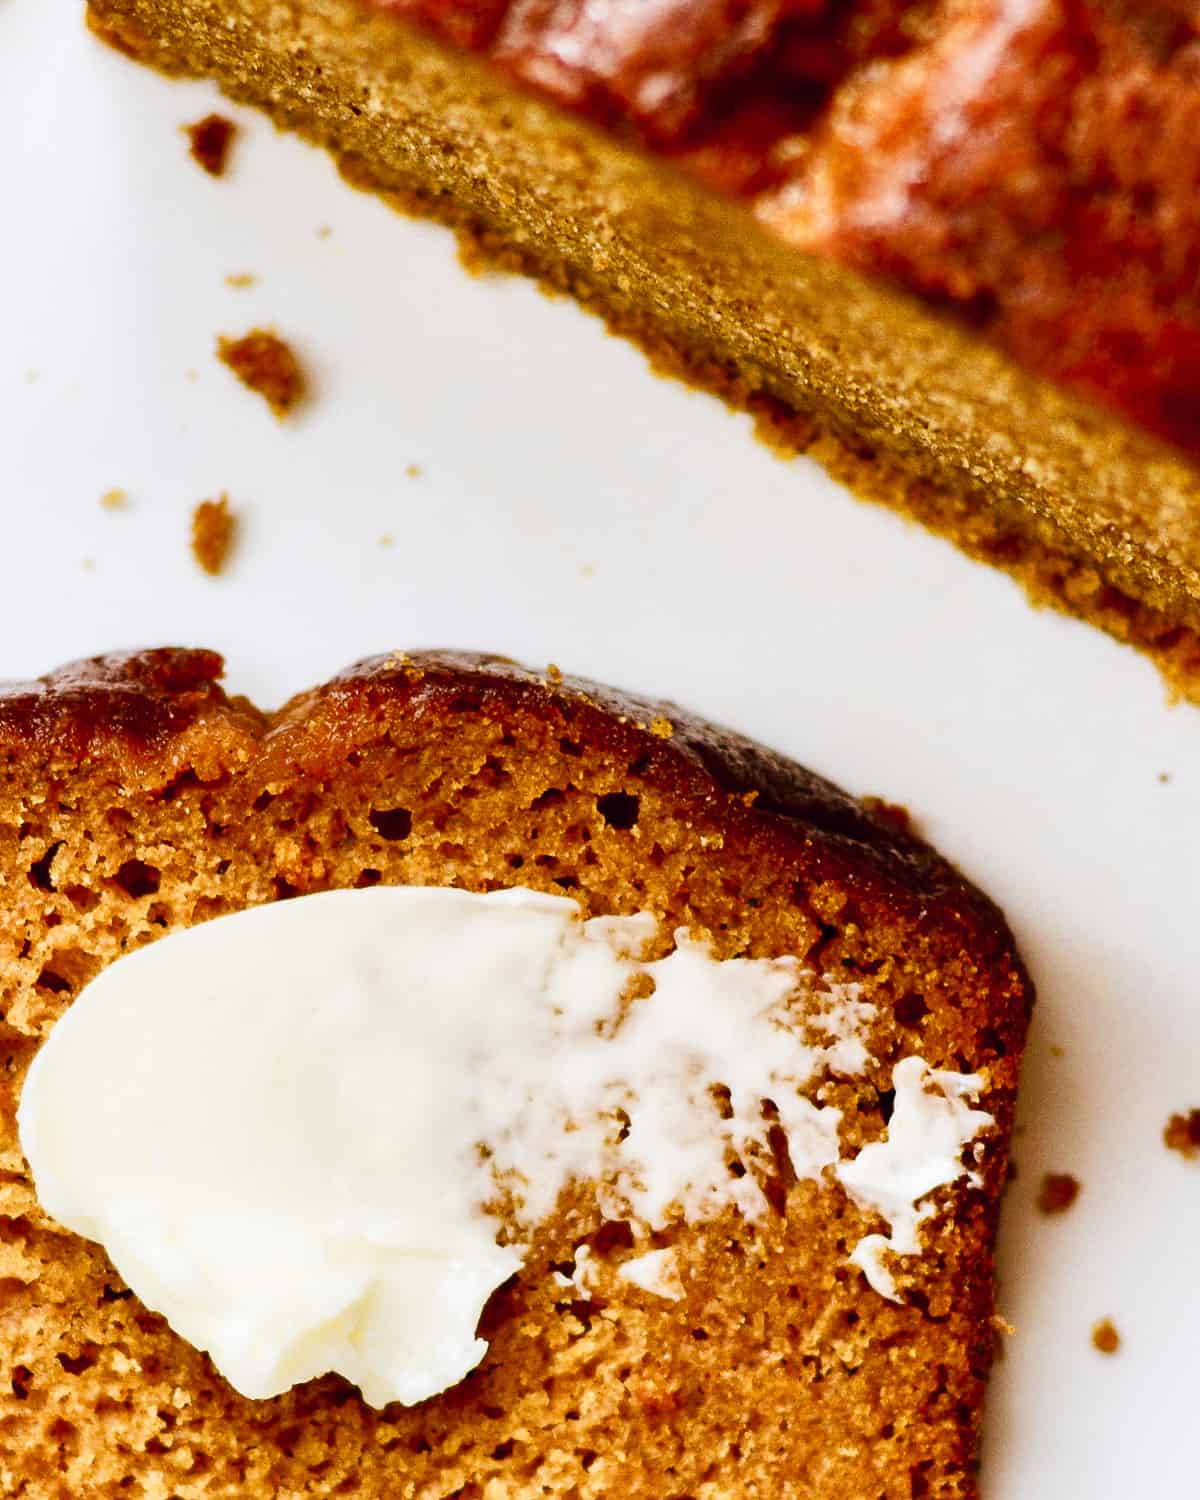 Slice of pumpkin bread with butter.